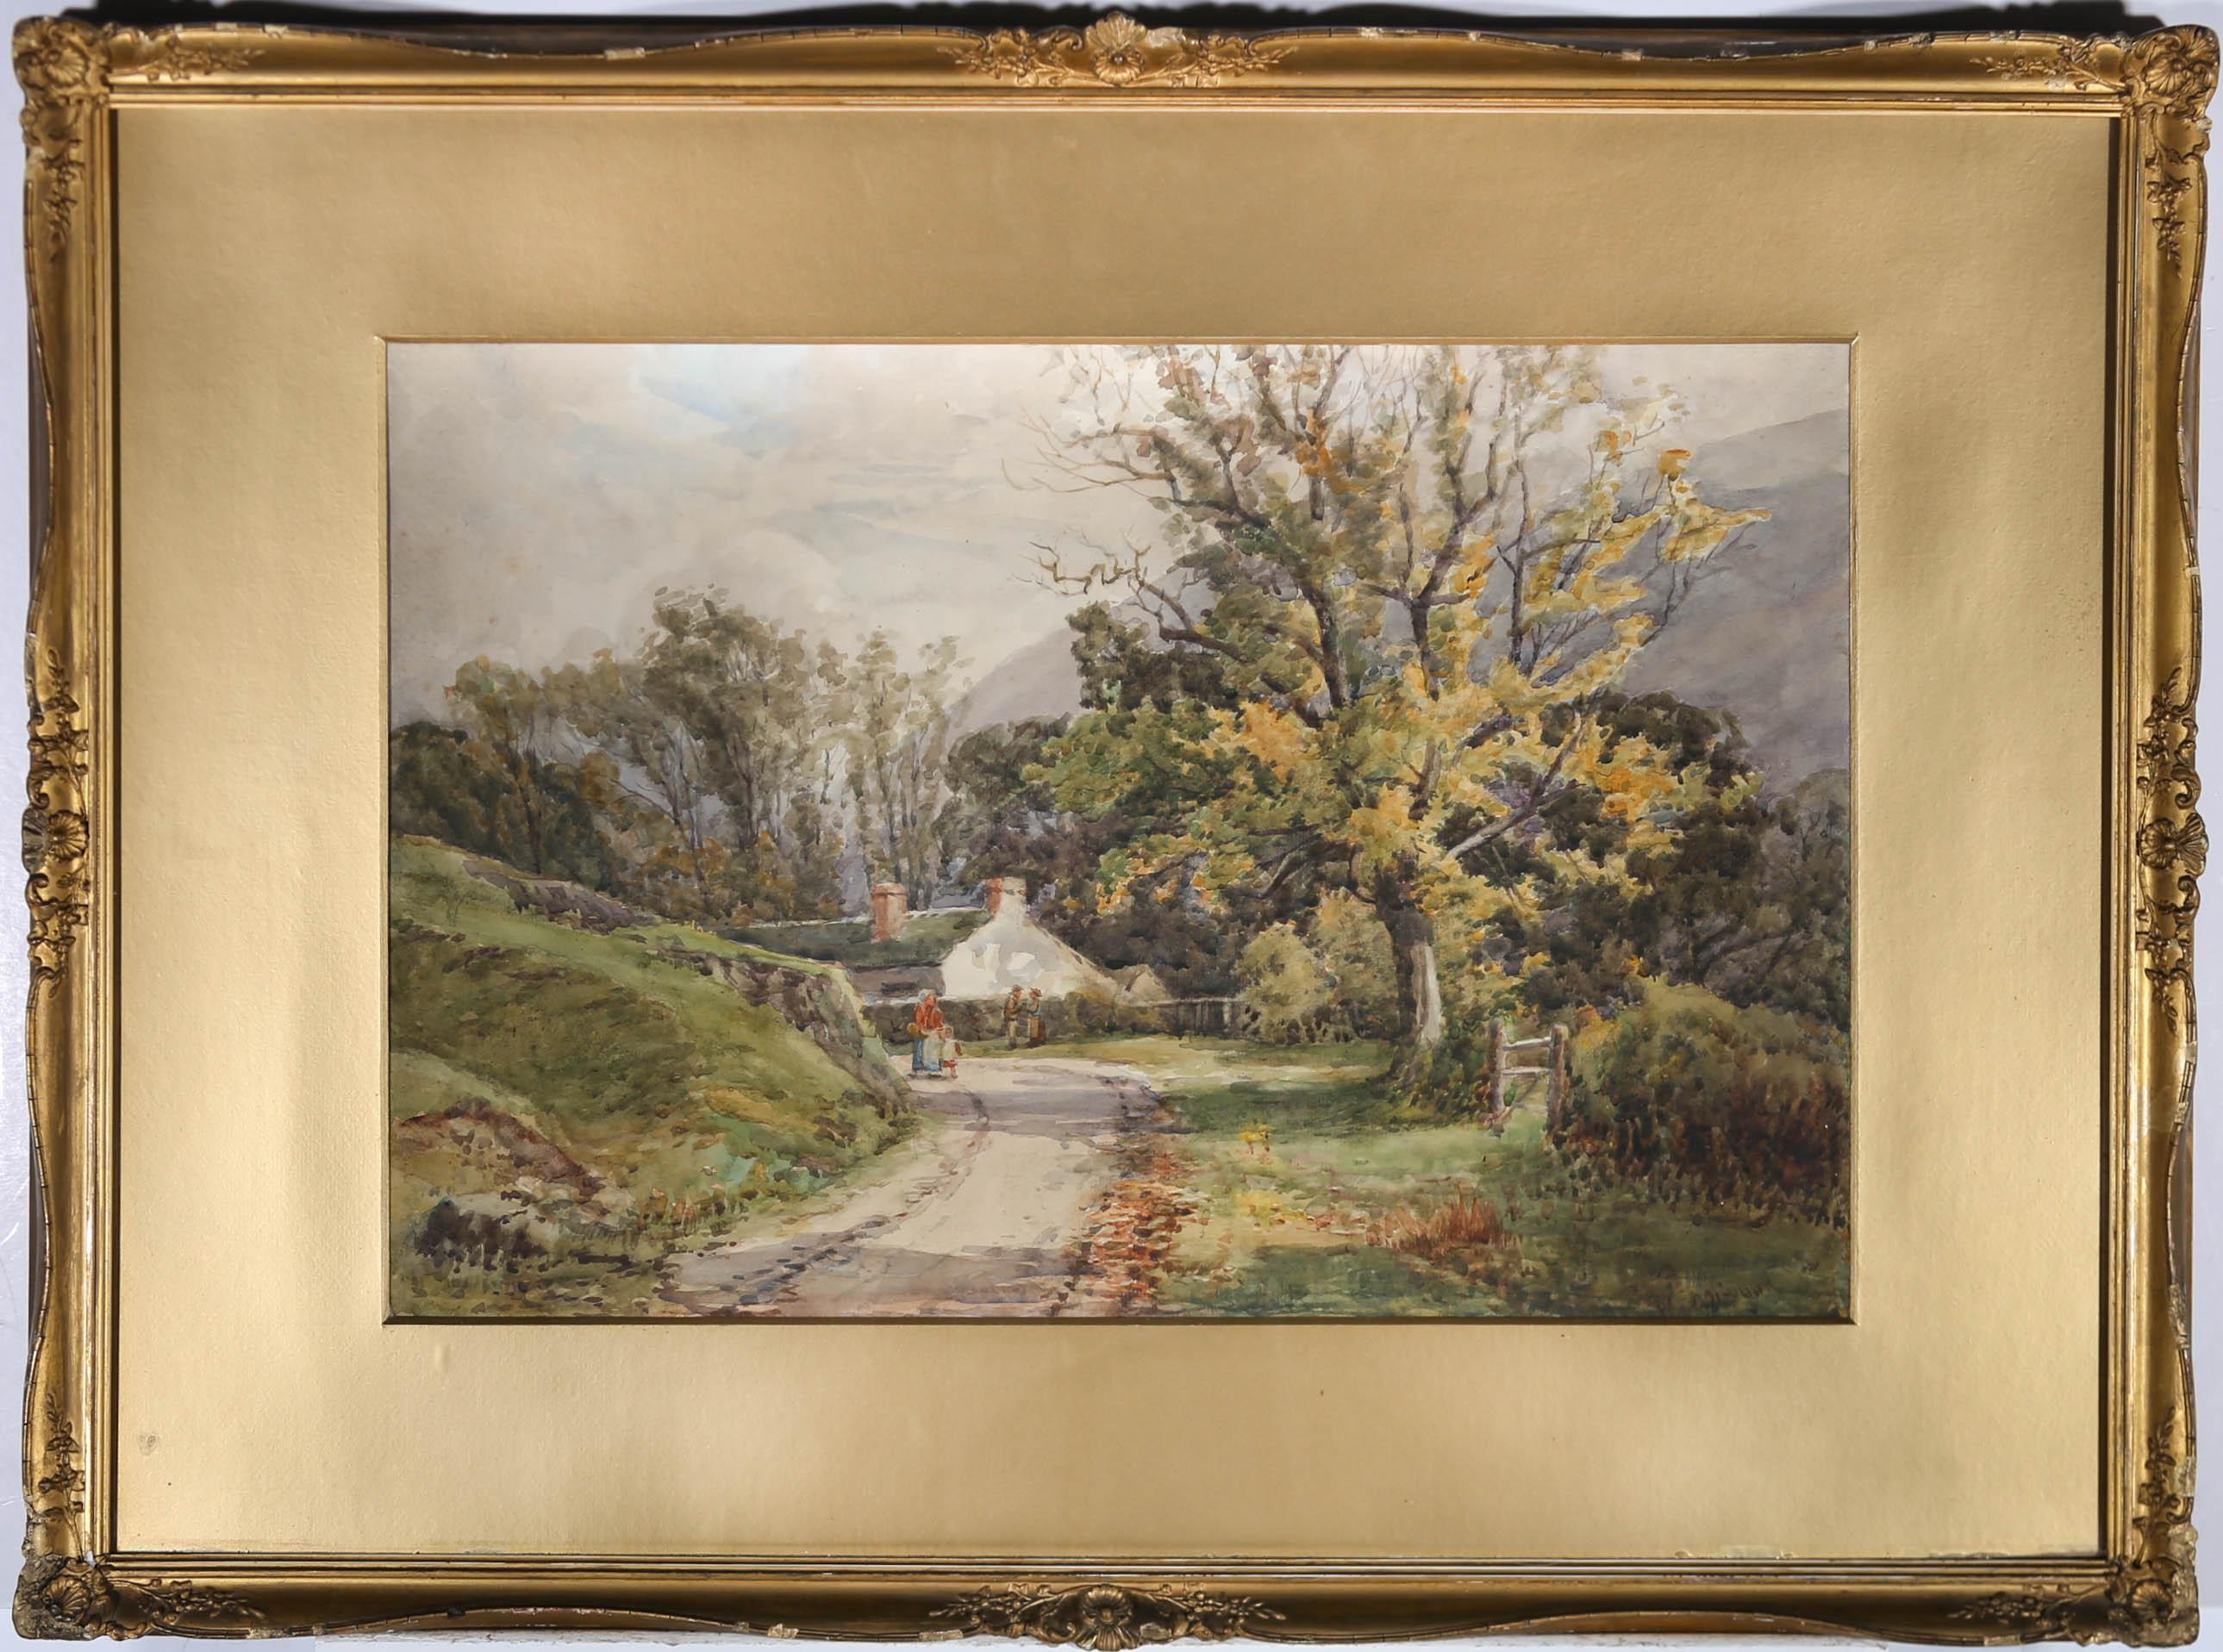 A softly painted impressionist landscape by Walter Eastwood, depicting a winding country lane heading towards the village of Buttermere, Cumbria. Indistinctly signed by the artist to the lower right-hand corner. With a signed artist's label verso.